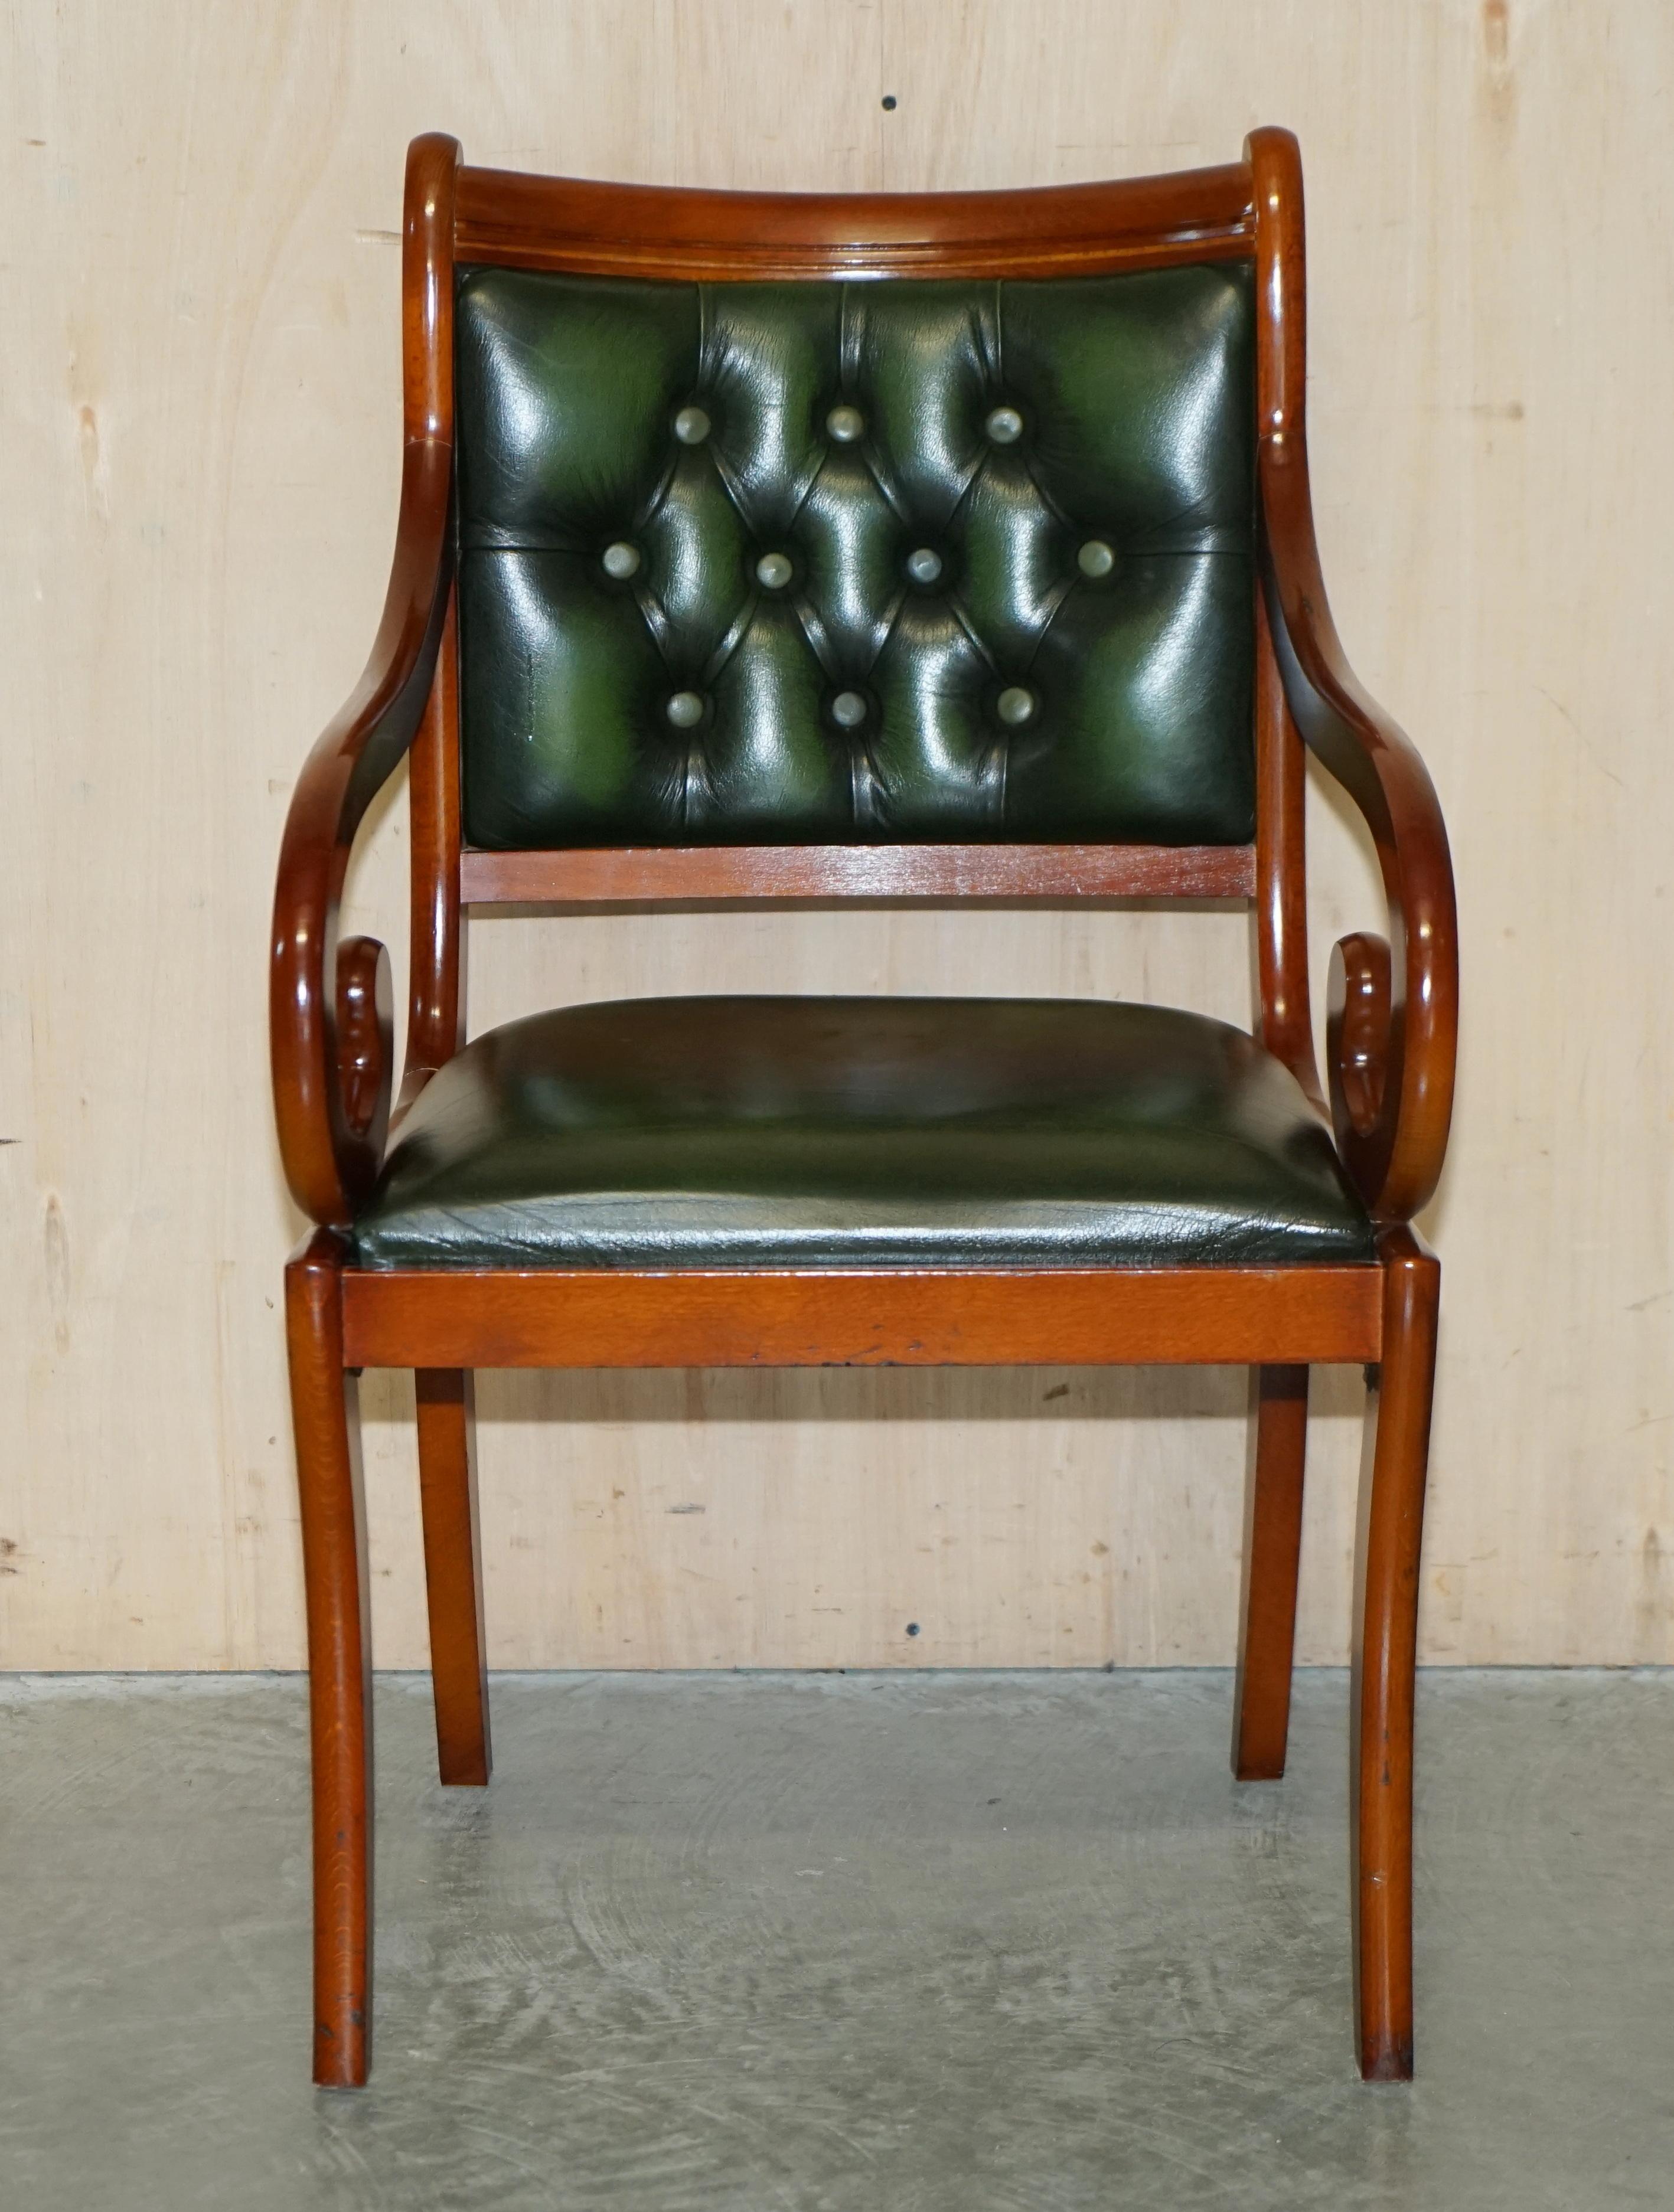 We are delighted to offer for sale this lovely, Chesterfield buttoned green leather desk chair 

A good looking well-made and decorative captain’s chair, it has a light beechwood frame with a oak finish and green leather upholstery 

We have